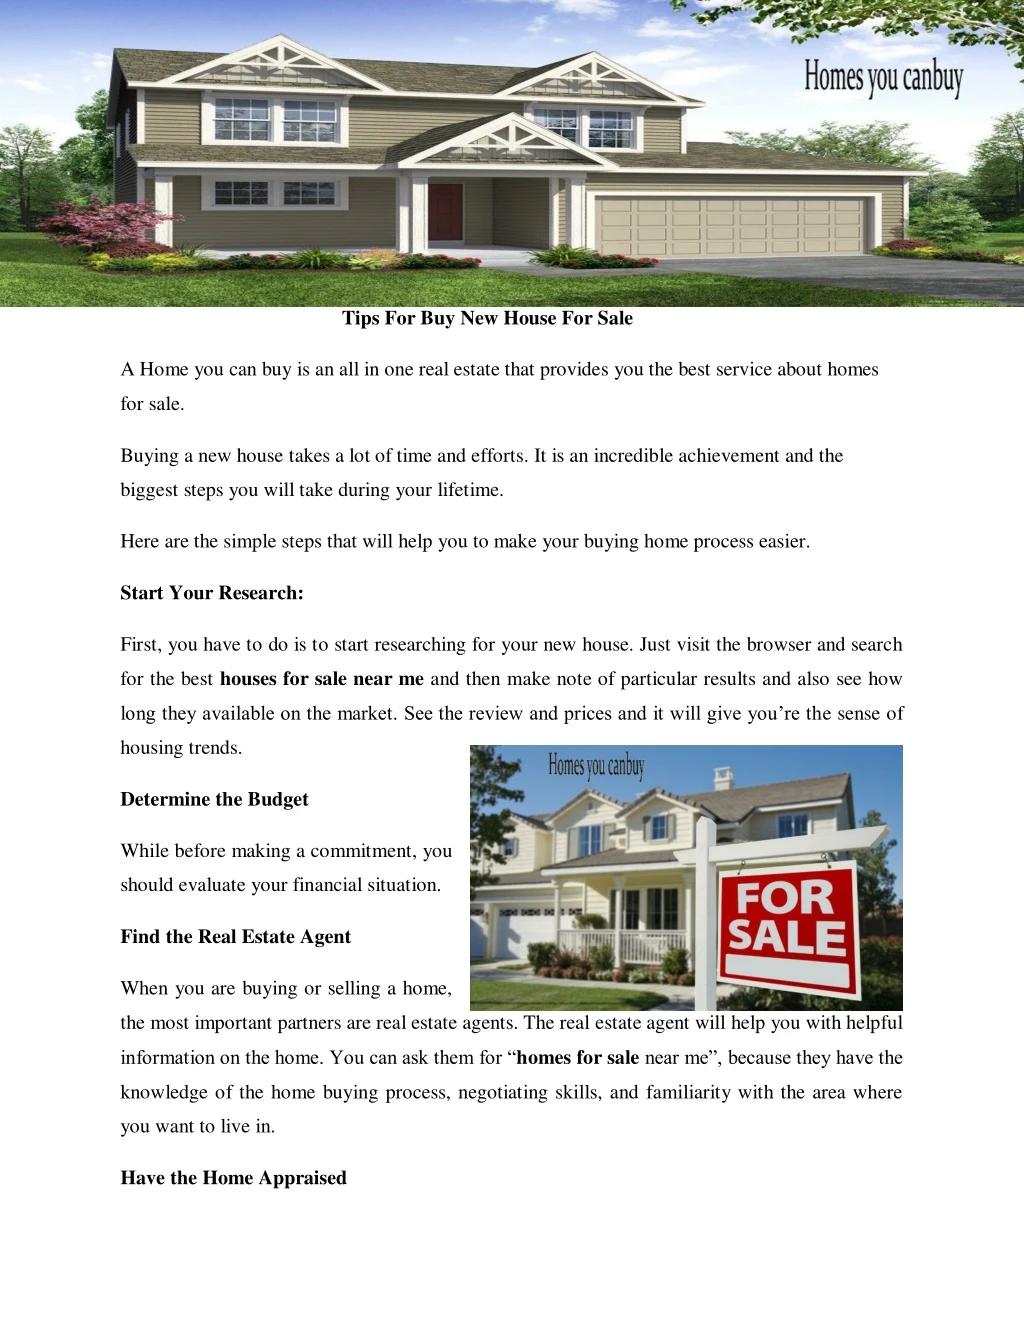 tips for buy new house for sale